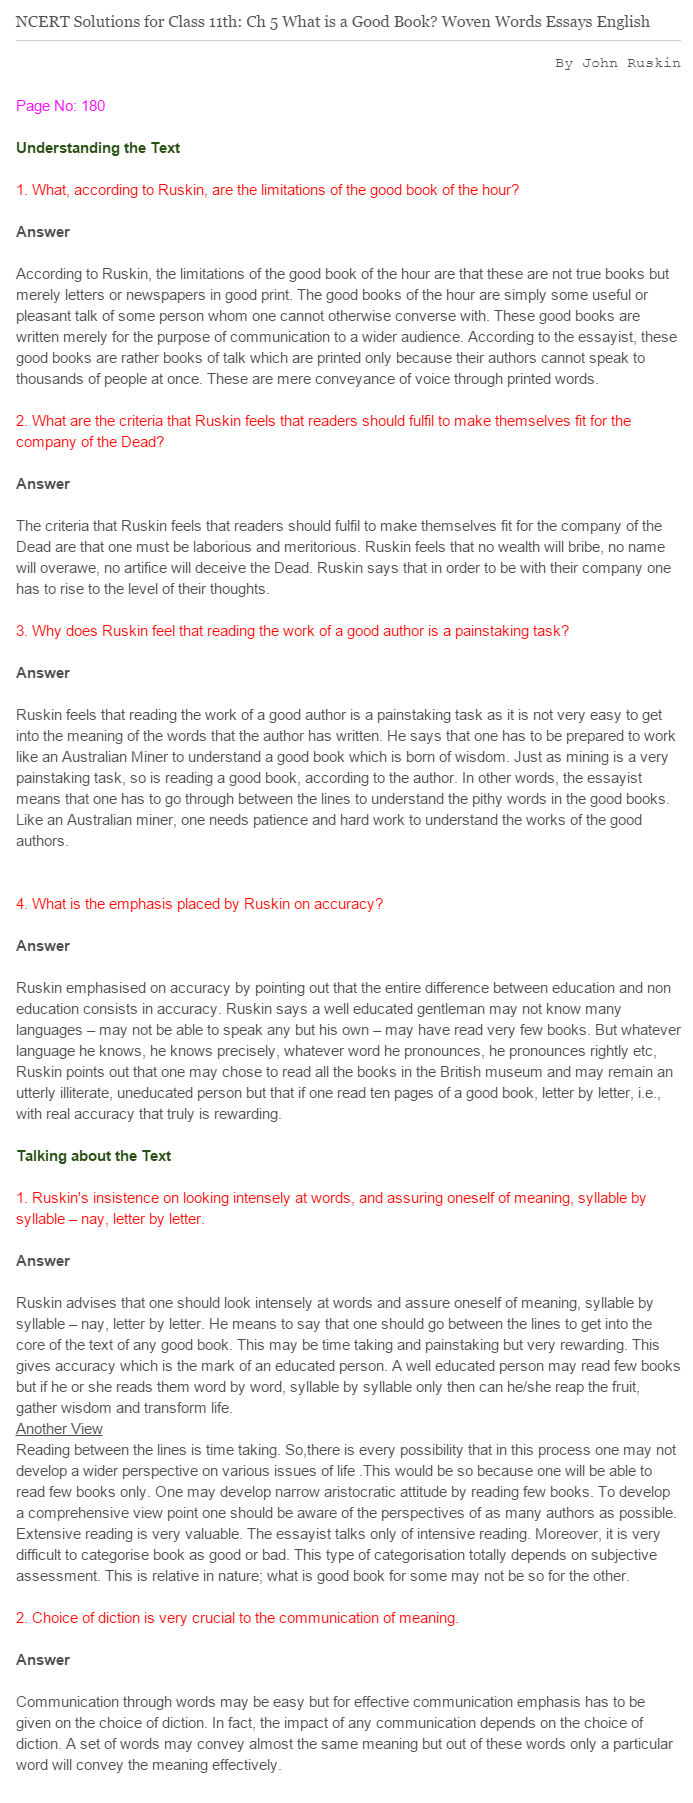 NCERT-Solutions-For-Class-11-English-Woven-Words-What-is-a-Good-Book